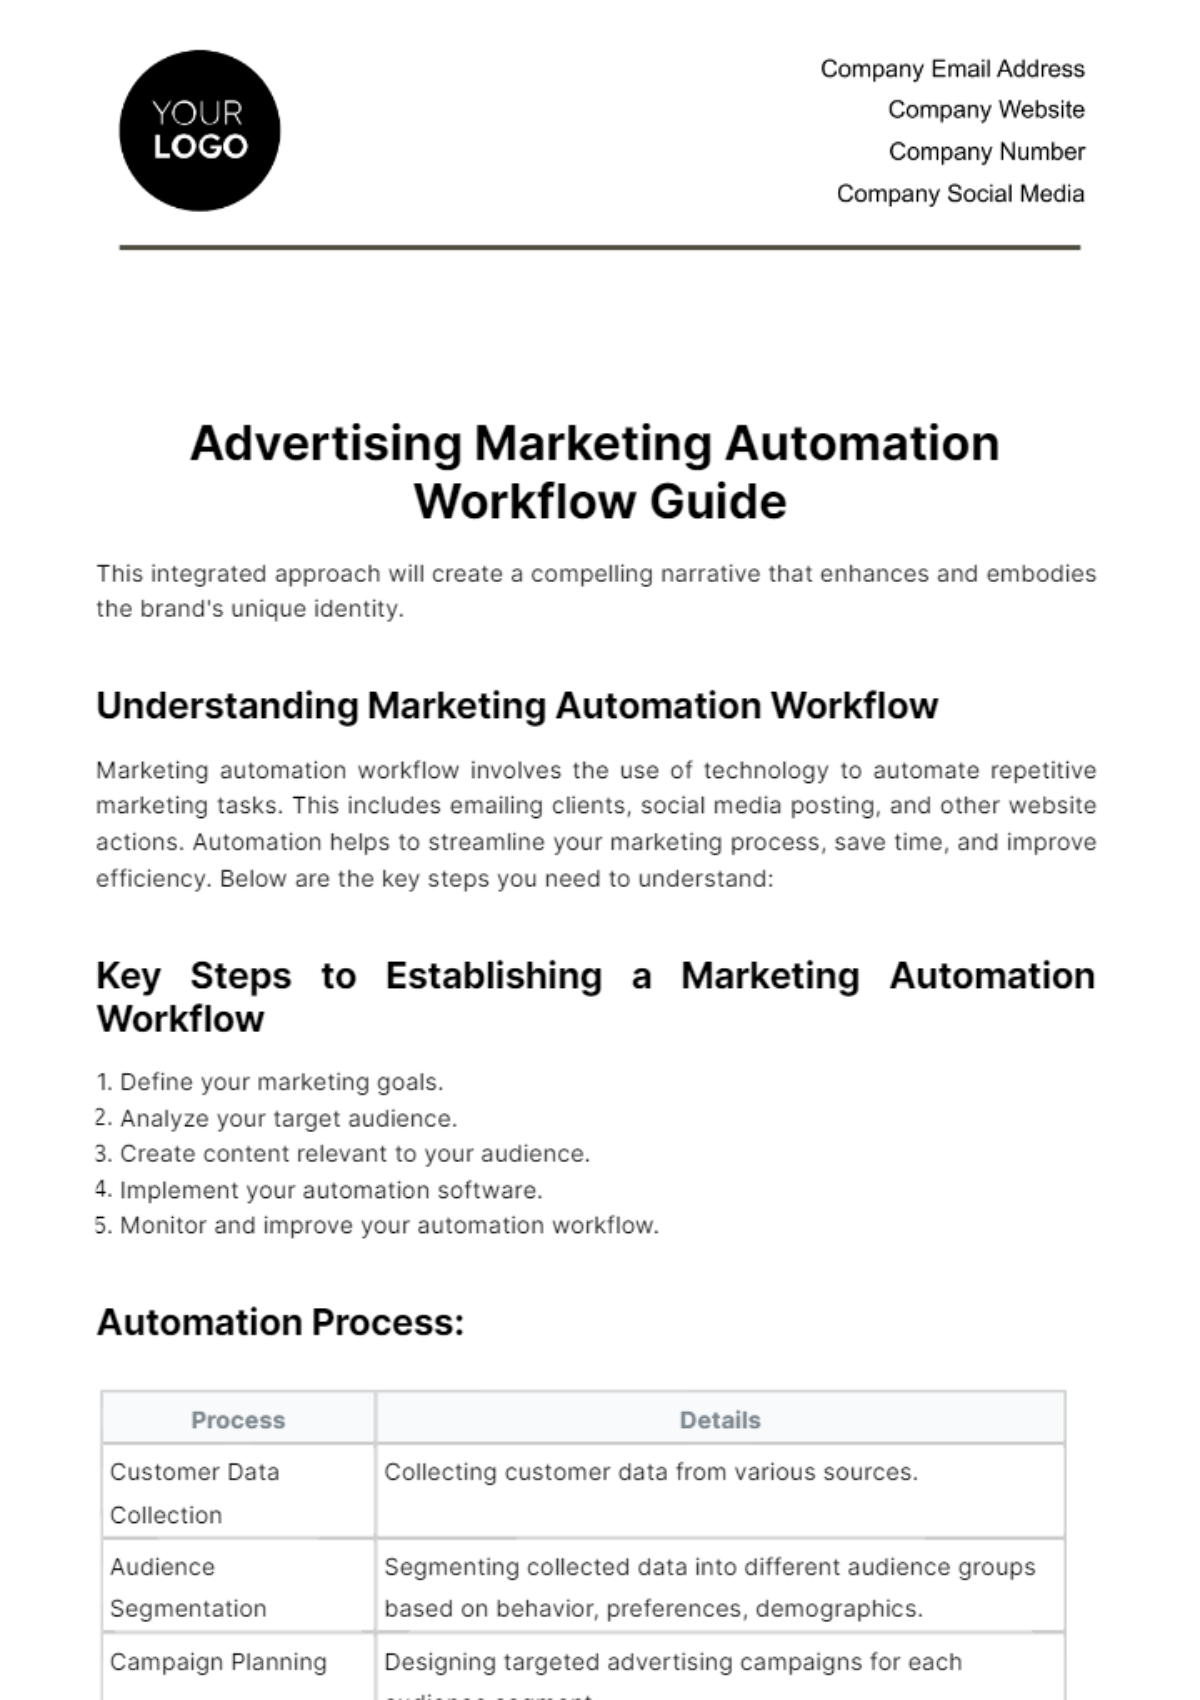 Advertising Marketing Automation Workflow Guide Template